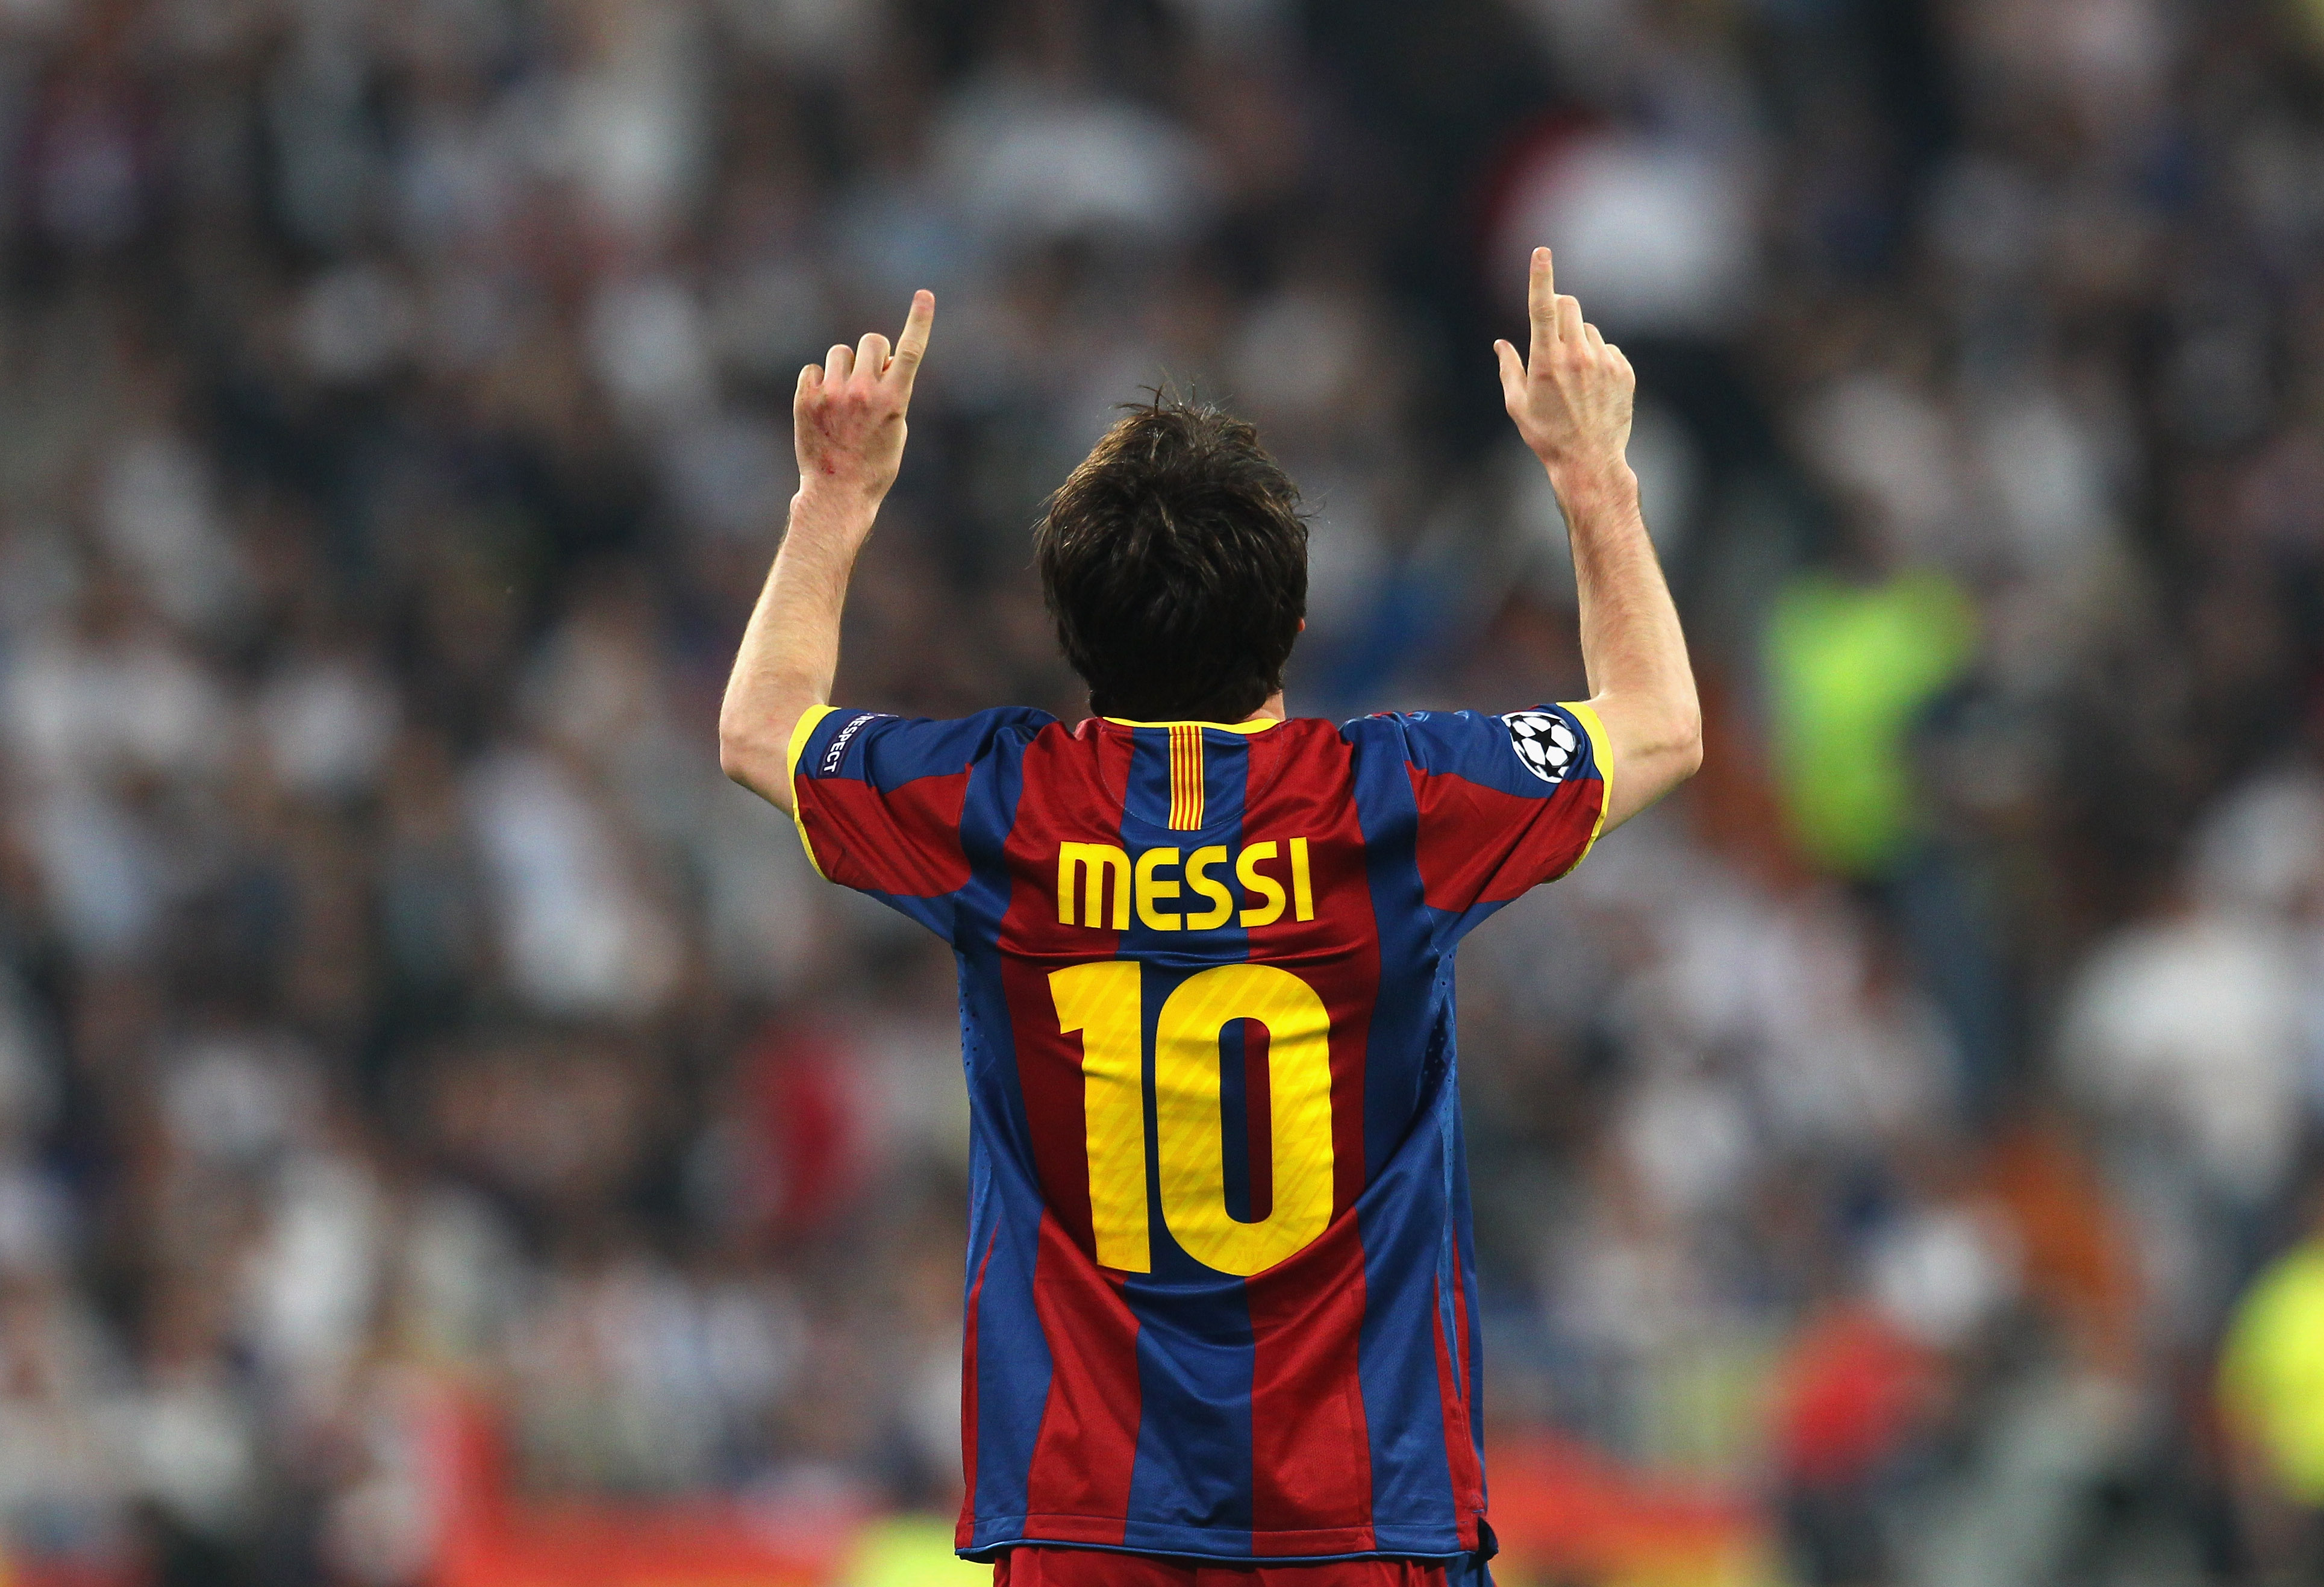 MADRID, SPAIN - APRIL 27:  Lionel Messi of Barcelona celebrates after scoring his second goal during the UEFA Champions League Semi Final first leg match between Real Madrid and Barcelona at Estadio Santiago Bernabeu on April 27, 2011 in Madrid, Spain.  (